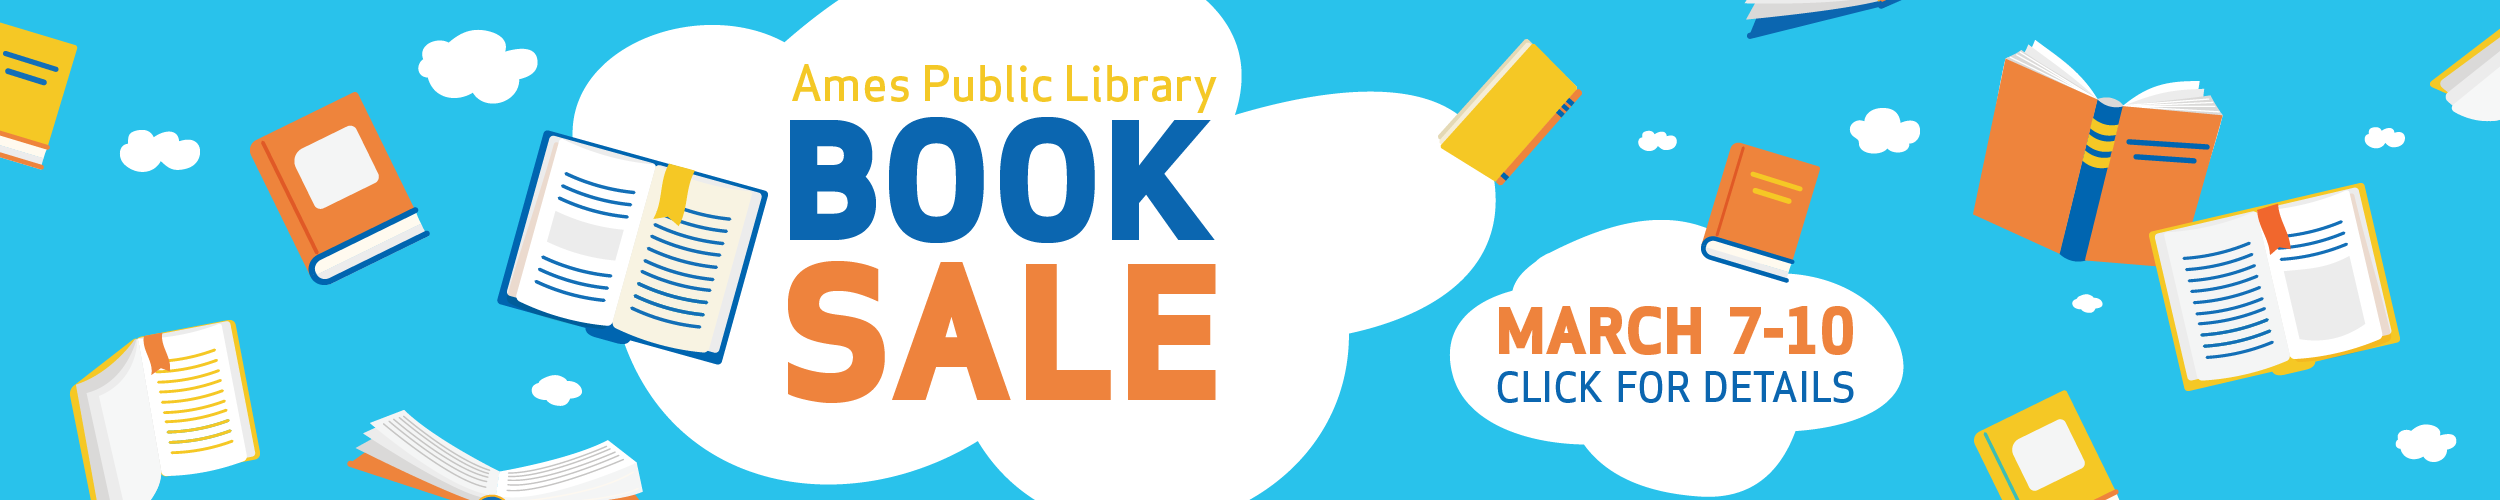 Ames Public Library Book Sale: March 7-10. Click for details.